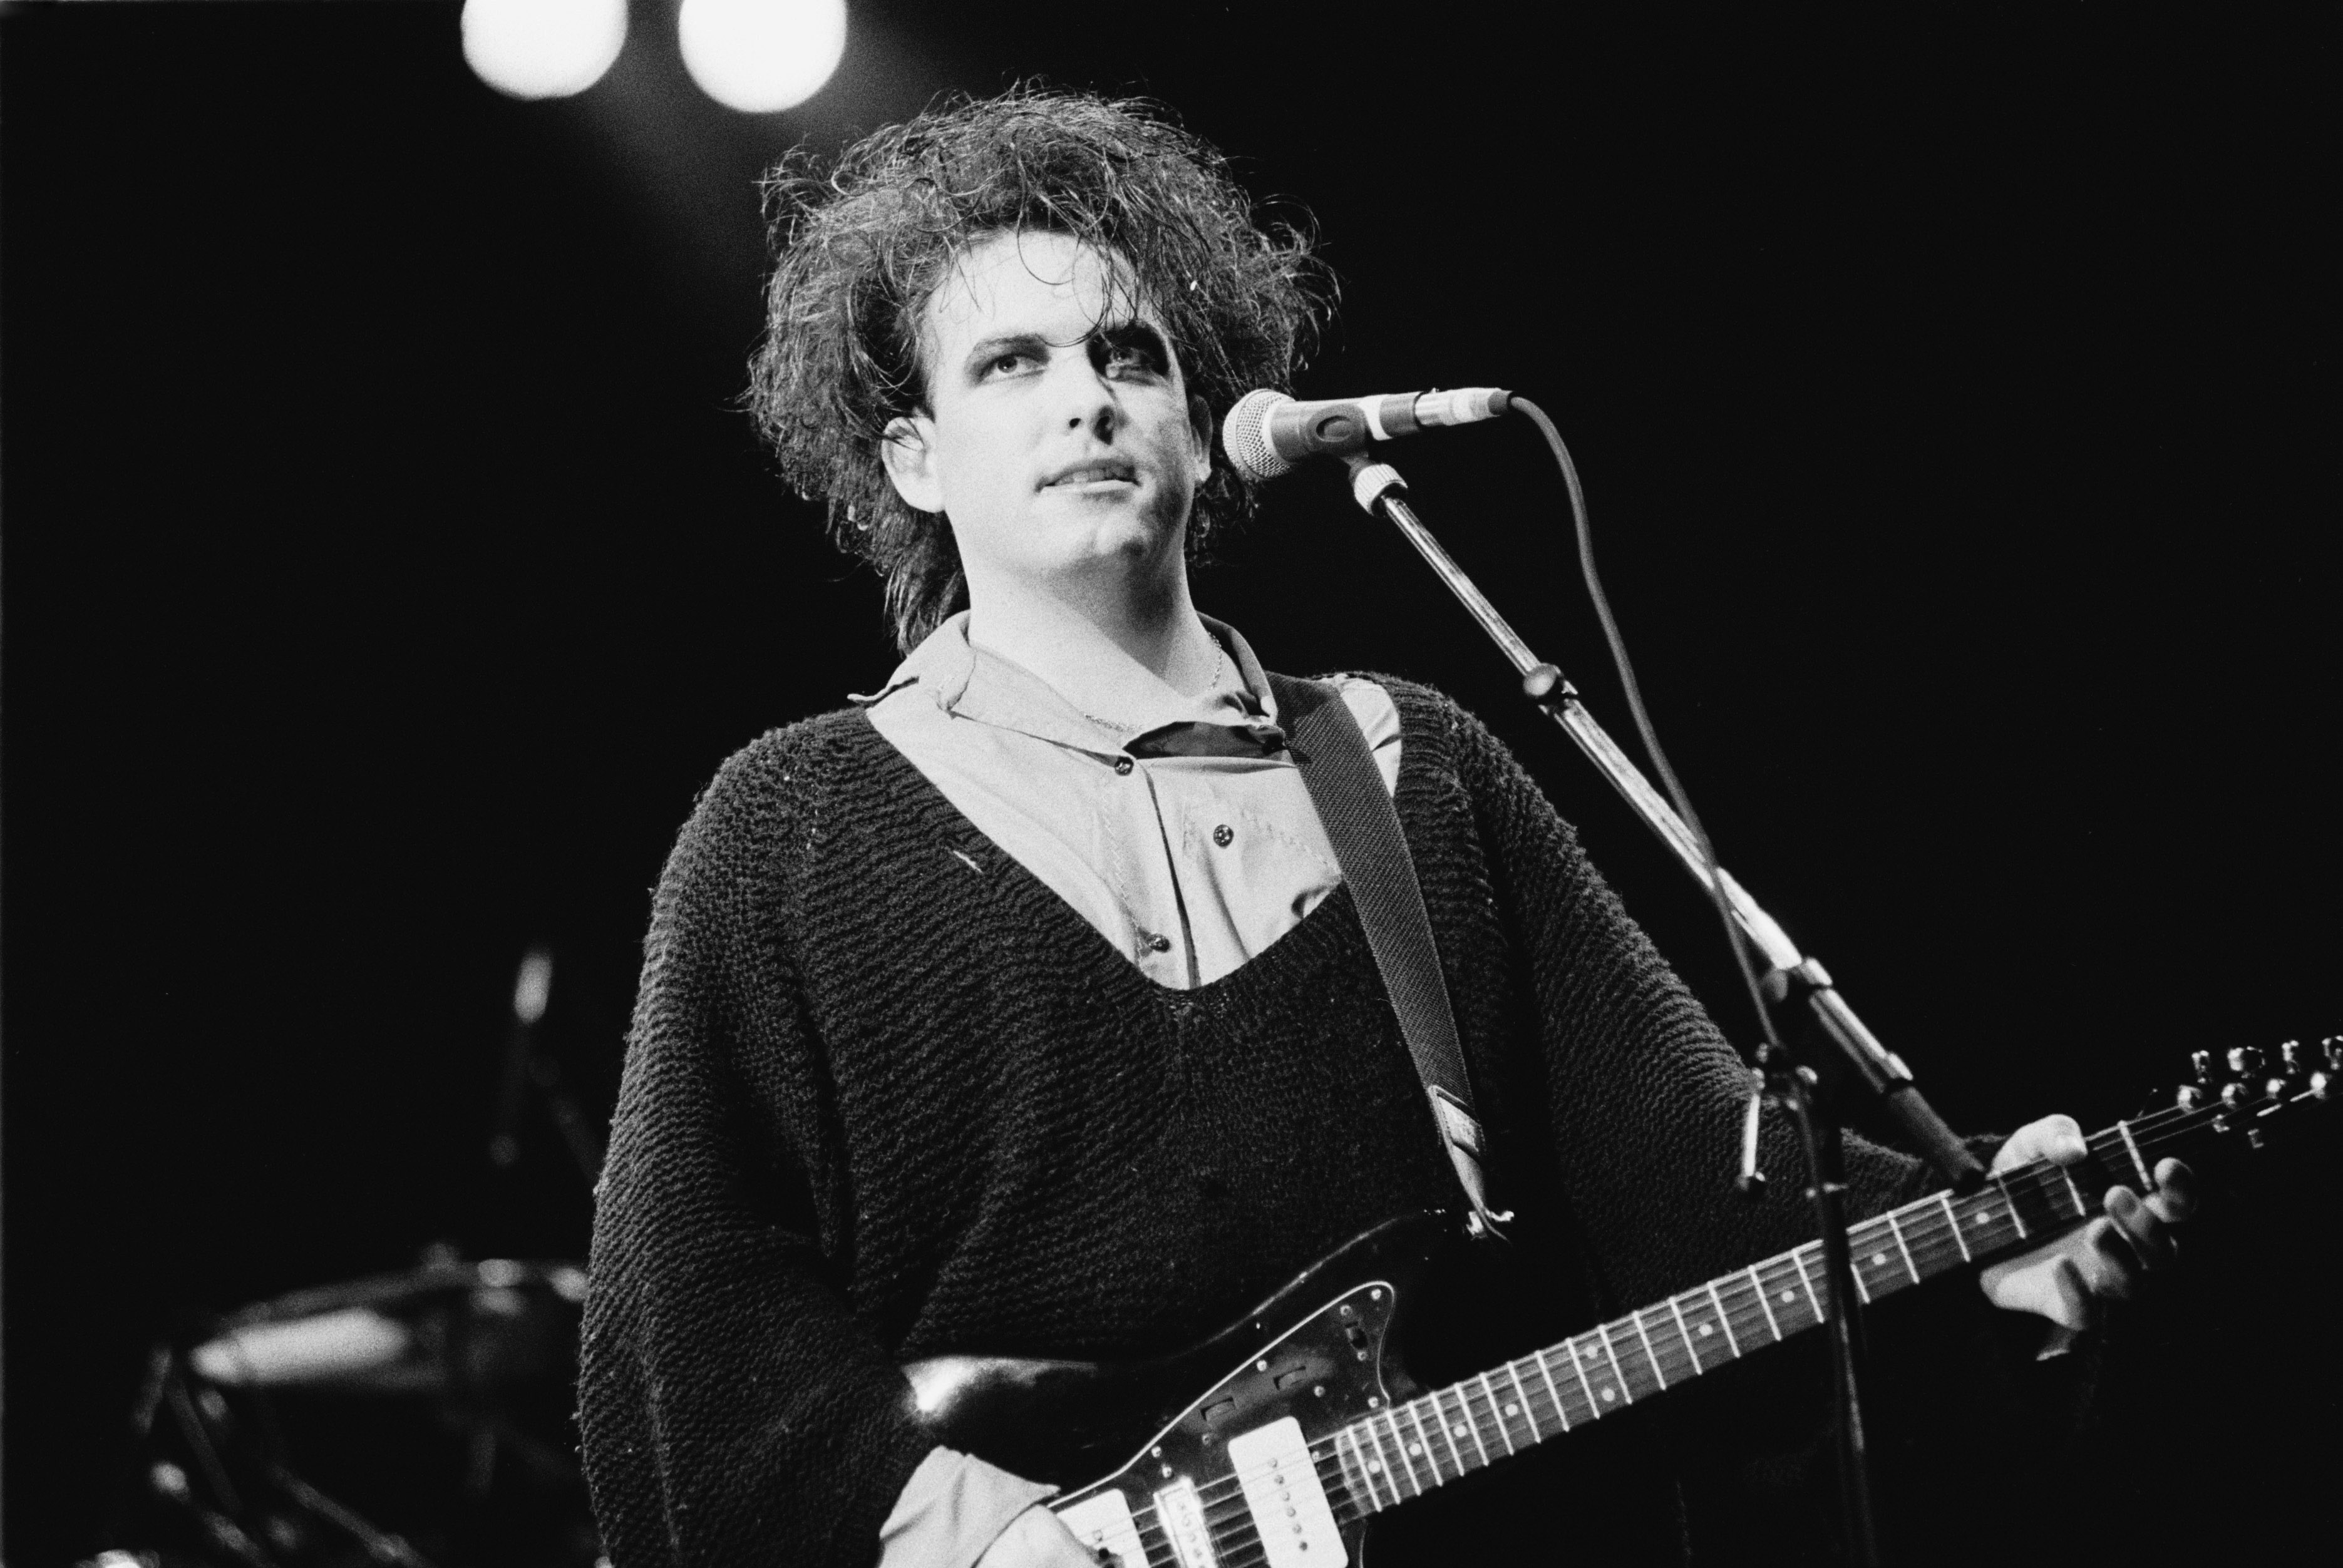 Robert Smith isn't people's perceptions': Stories behind classic photos of The  Cure - The Big Issue